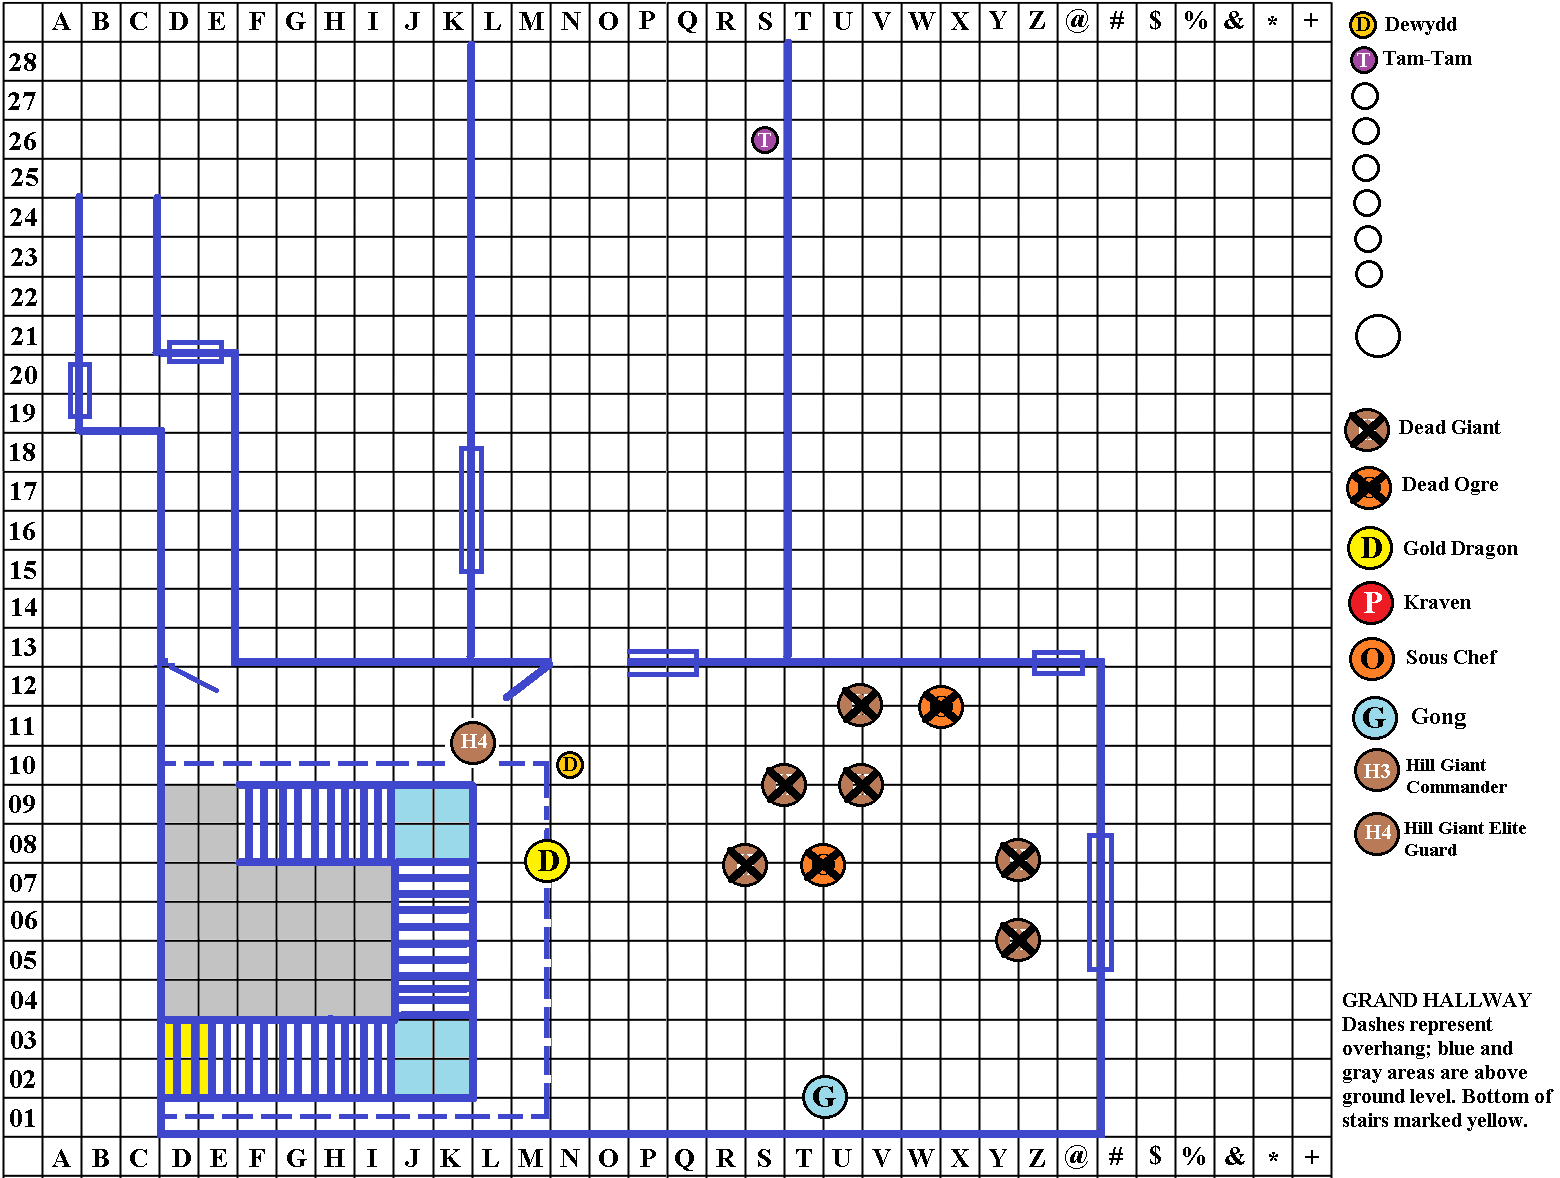 00-The-Grand-Hallway-Base-Map-01e1.png